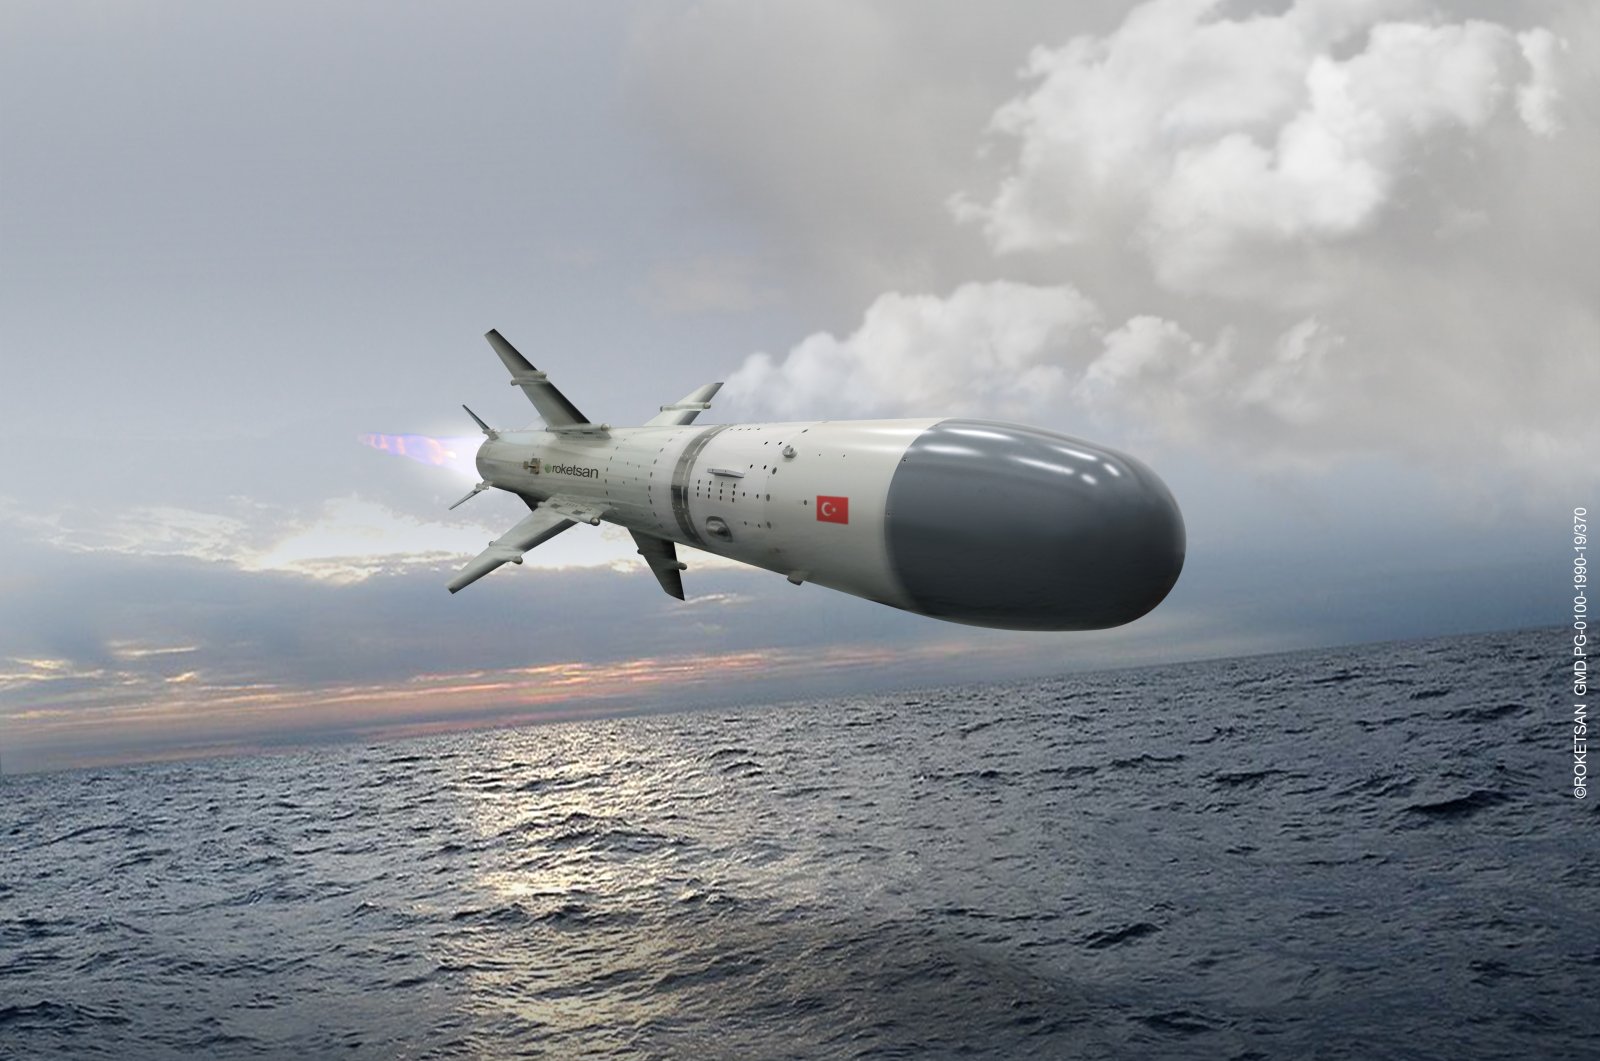 An artist's impression of Turkey's first anti-ship missile Atmaca. It is expected to be delivered to the Naval Forces at the end of this year, Sept. 26, 2020. (Photo by Roketsan via AA)